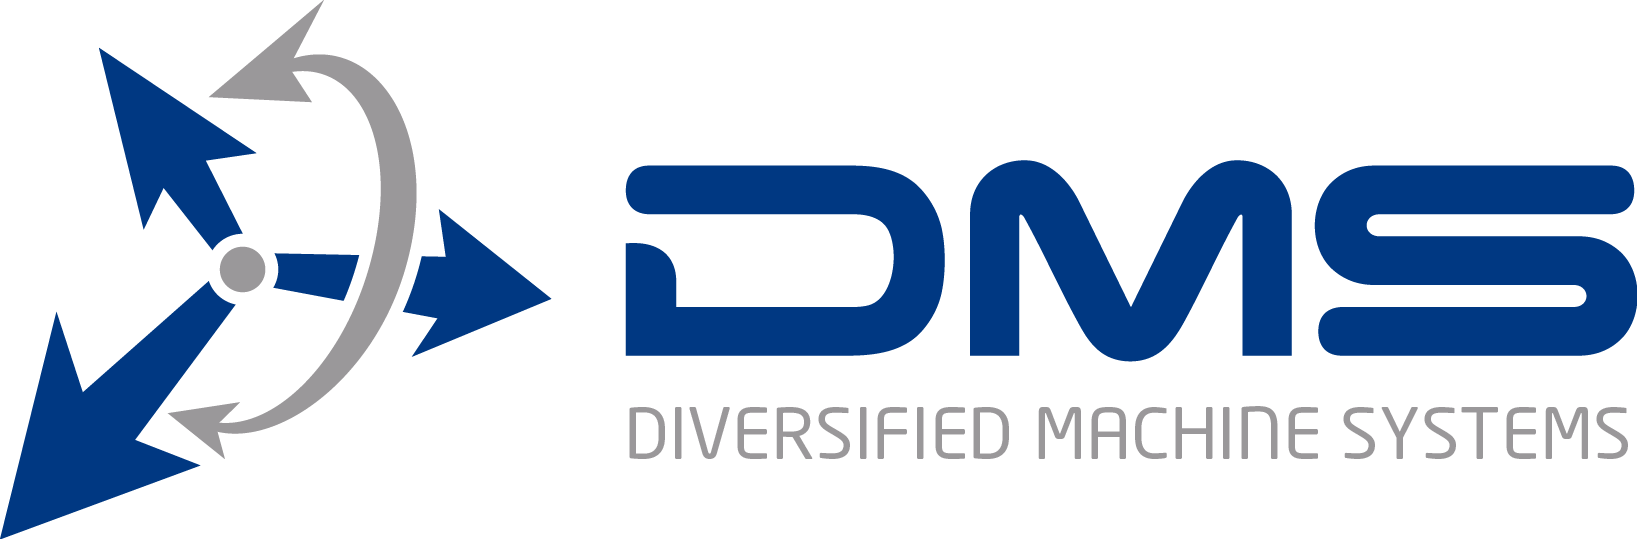 Diversified Machine Systems (DMS) Logo